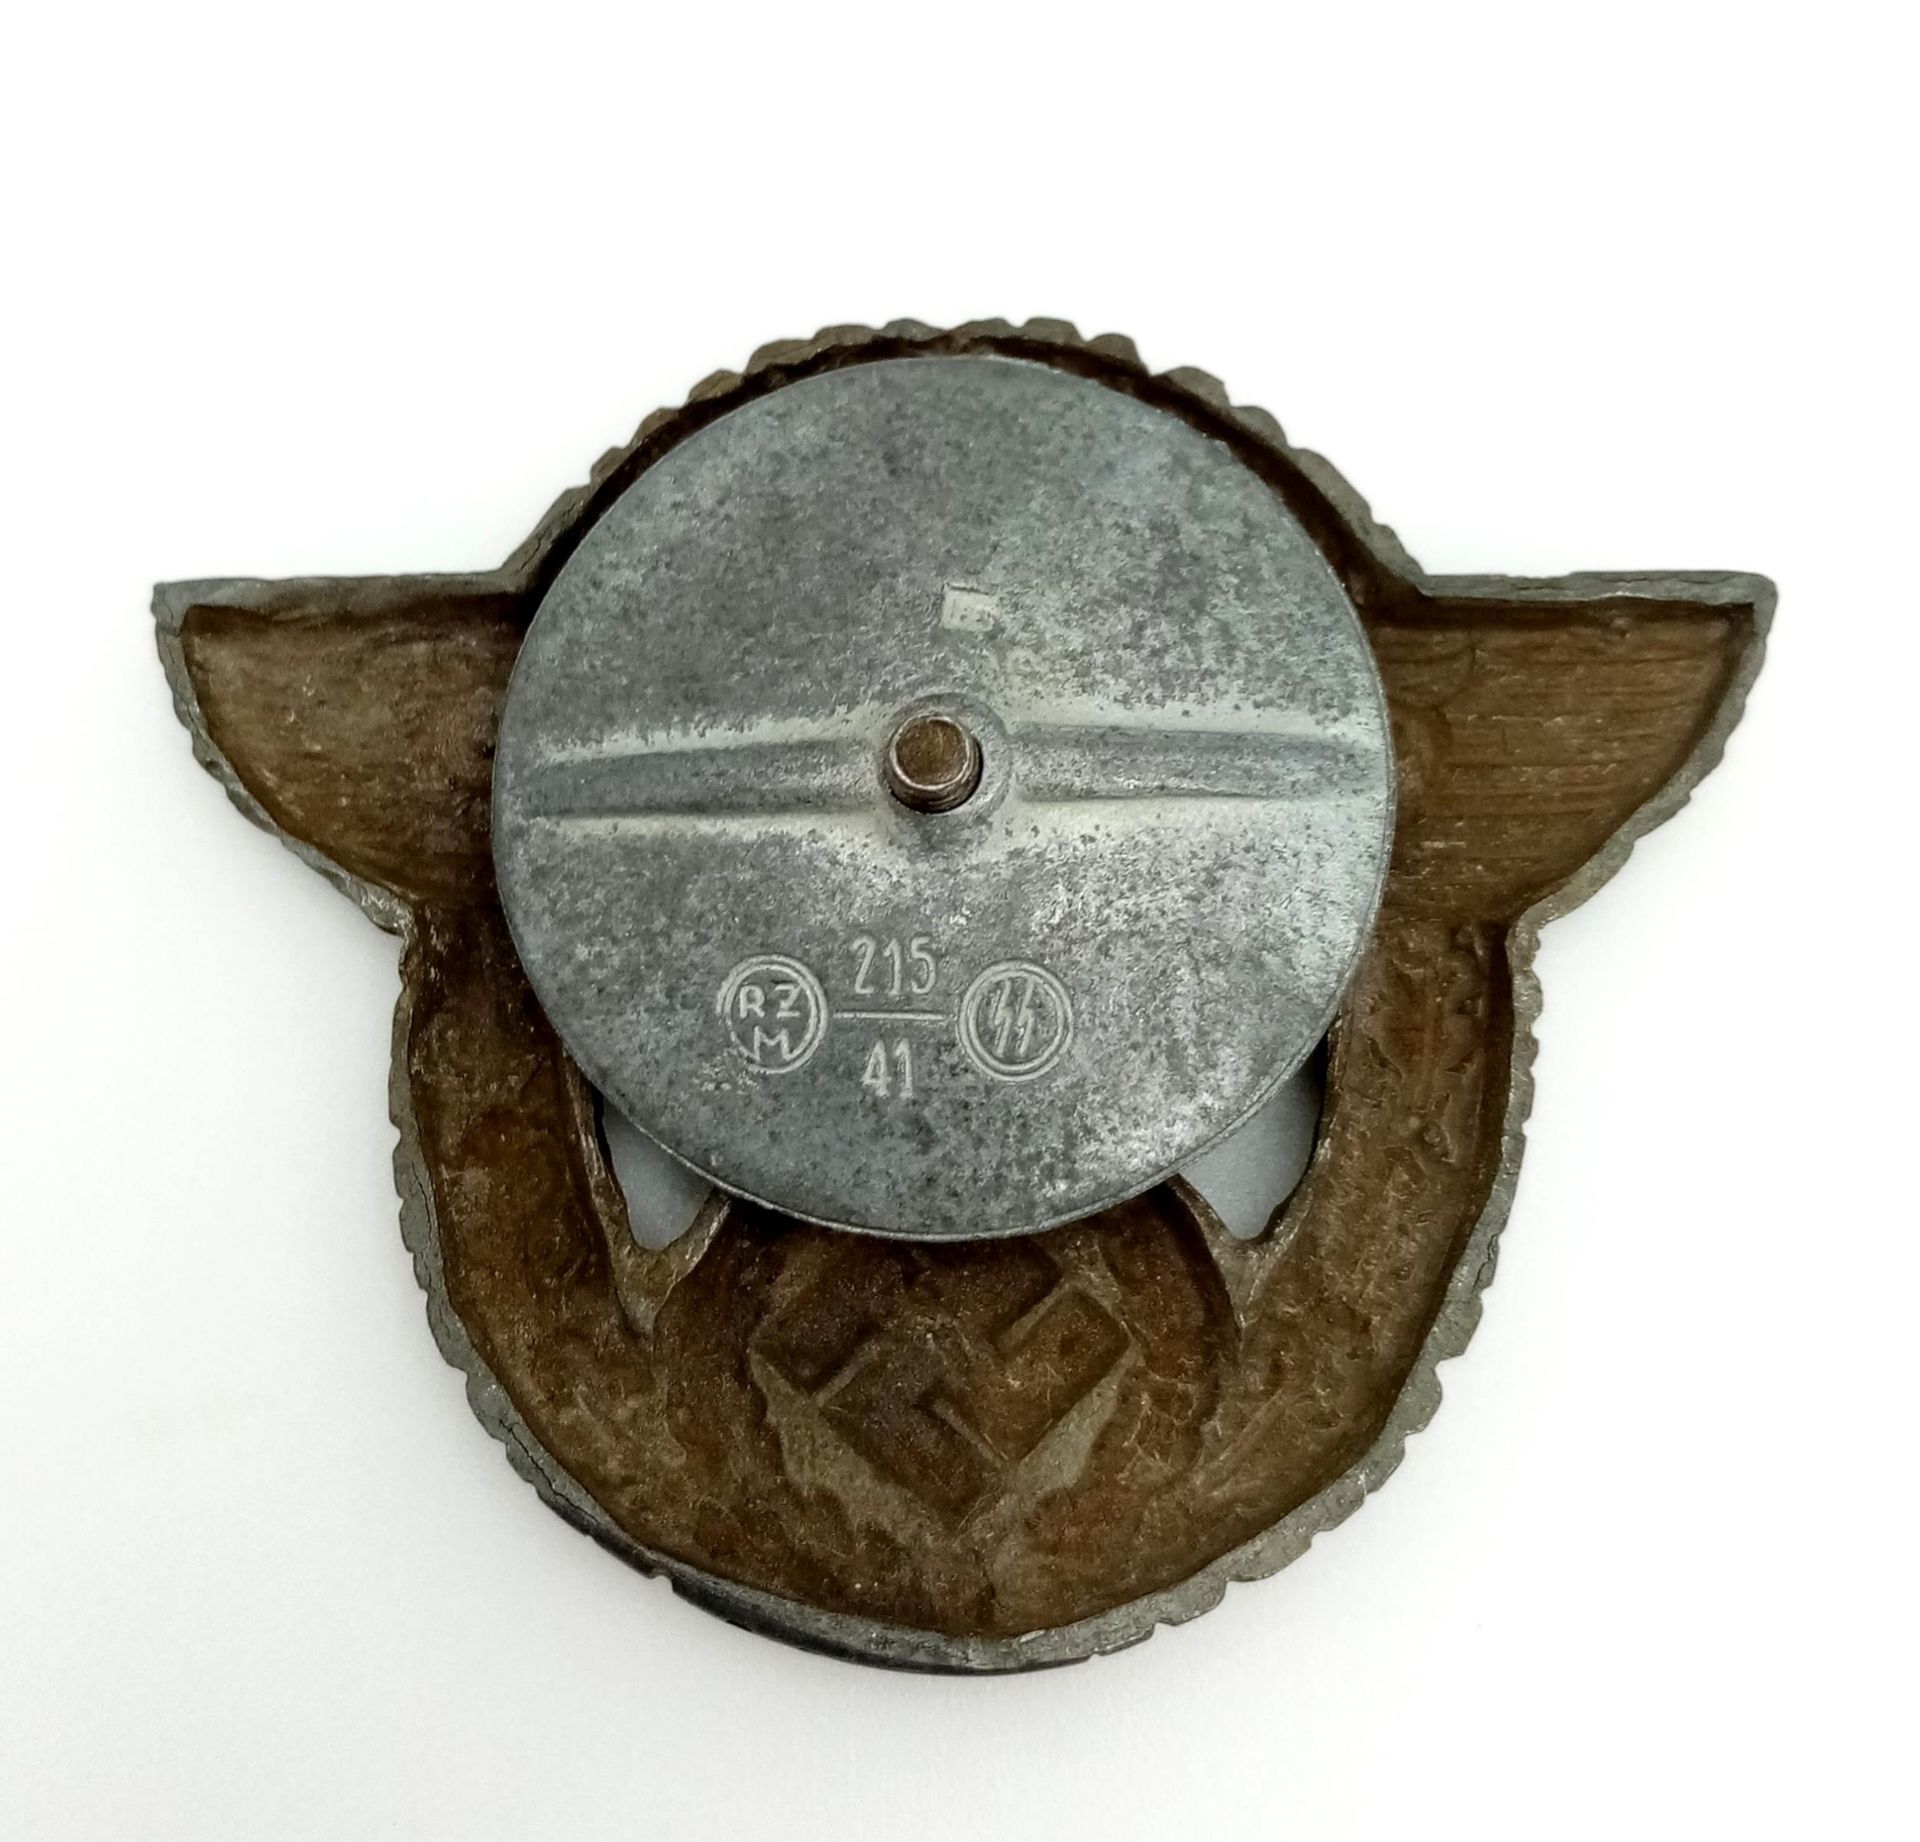 WW2 German Police Visor Cap Badge with screw back fitting for easy removal for cleaning etc. - Bild 2 aus 3